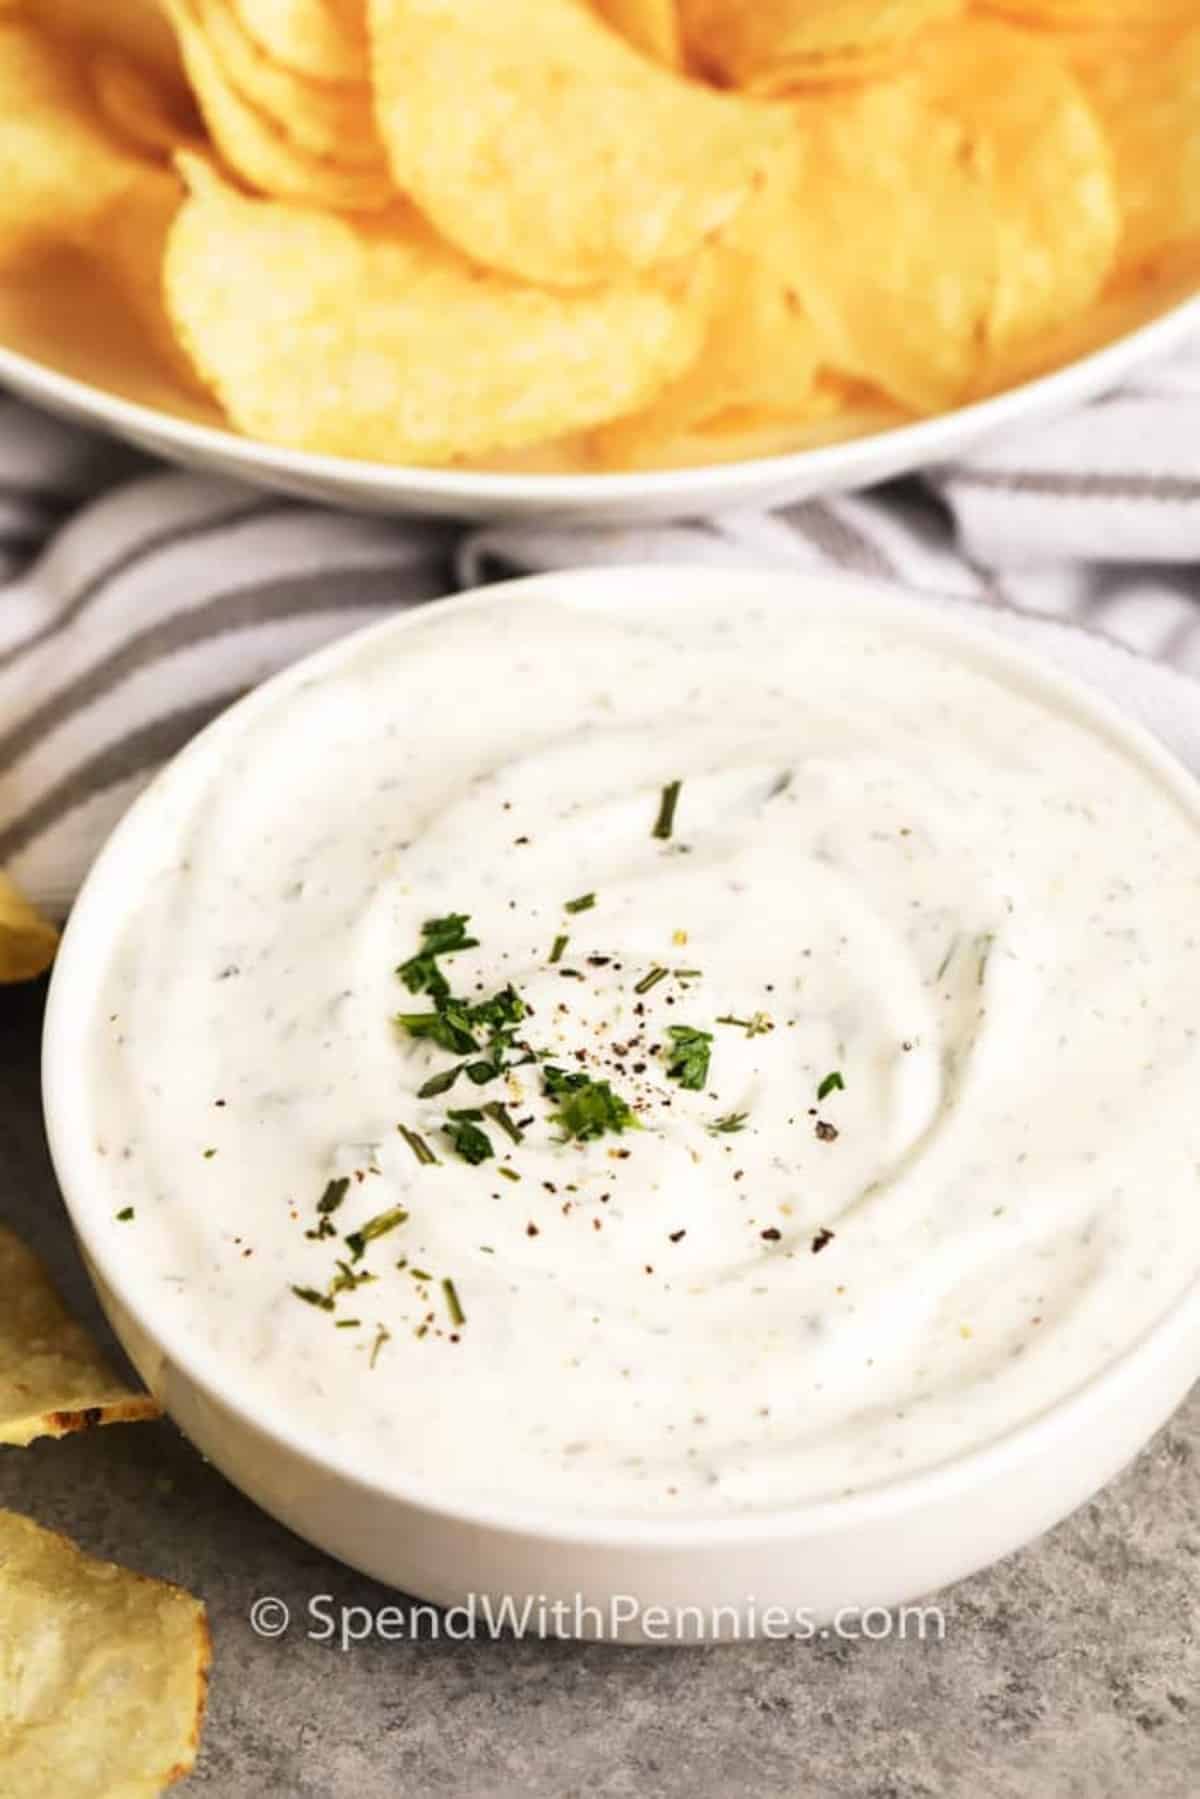 A bowl of dip with chips and herbs.